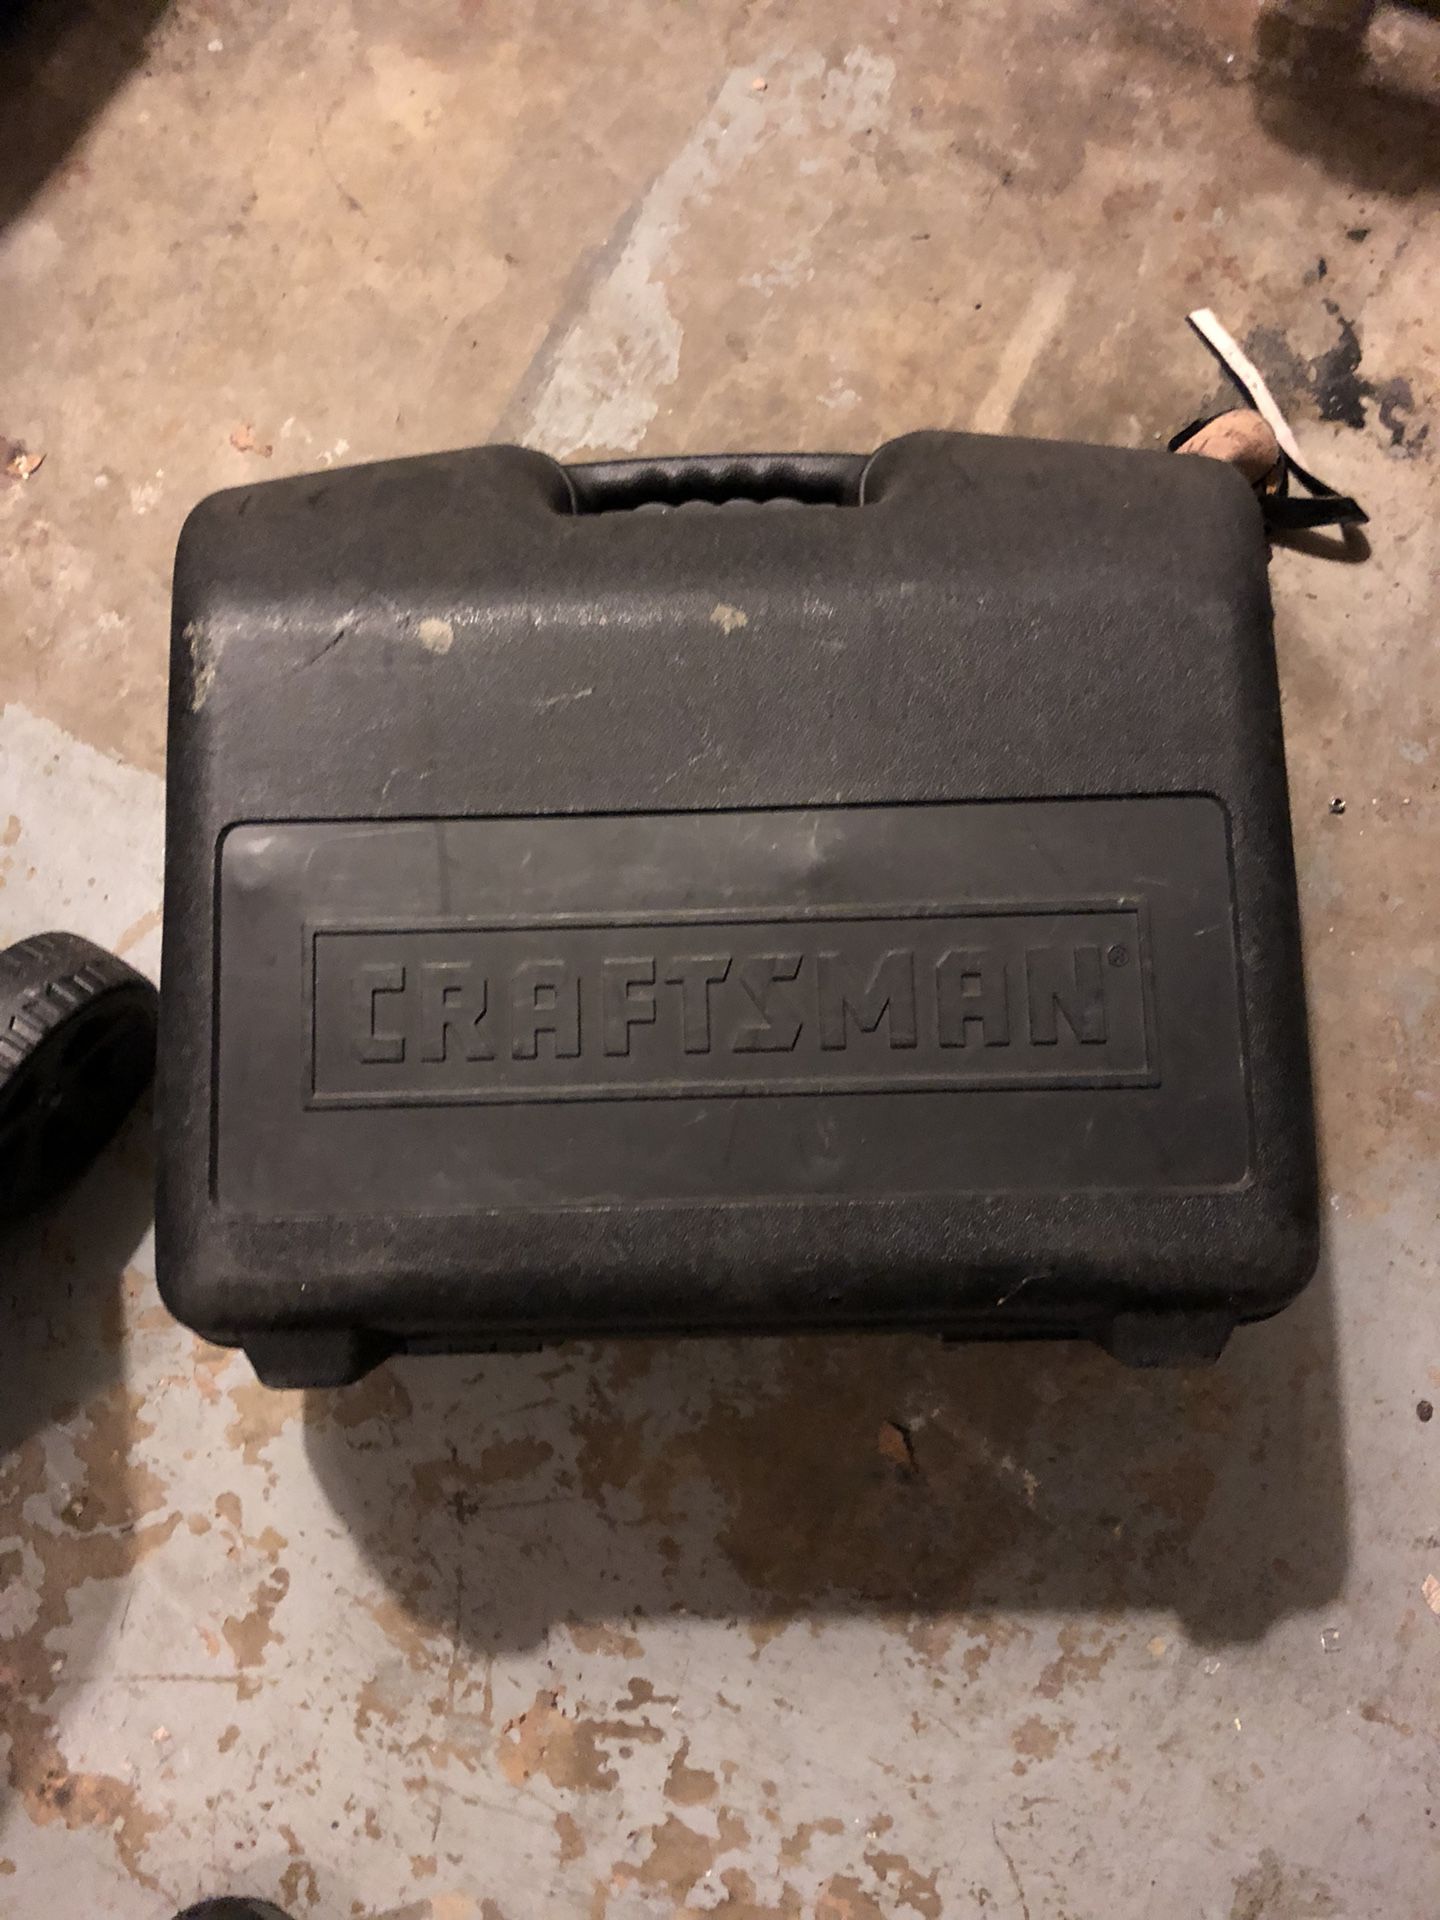 Craftsman saw and drill